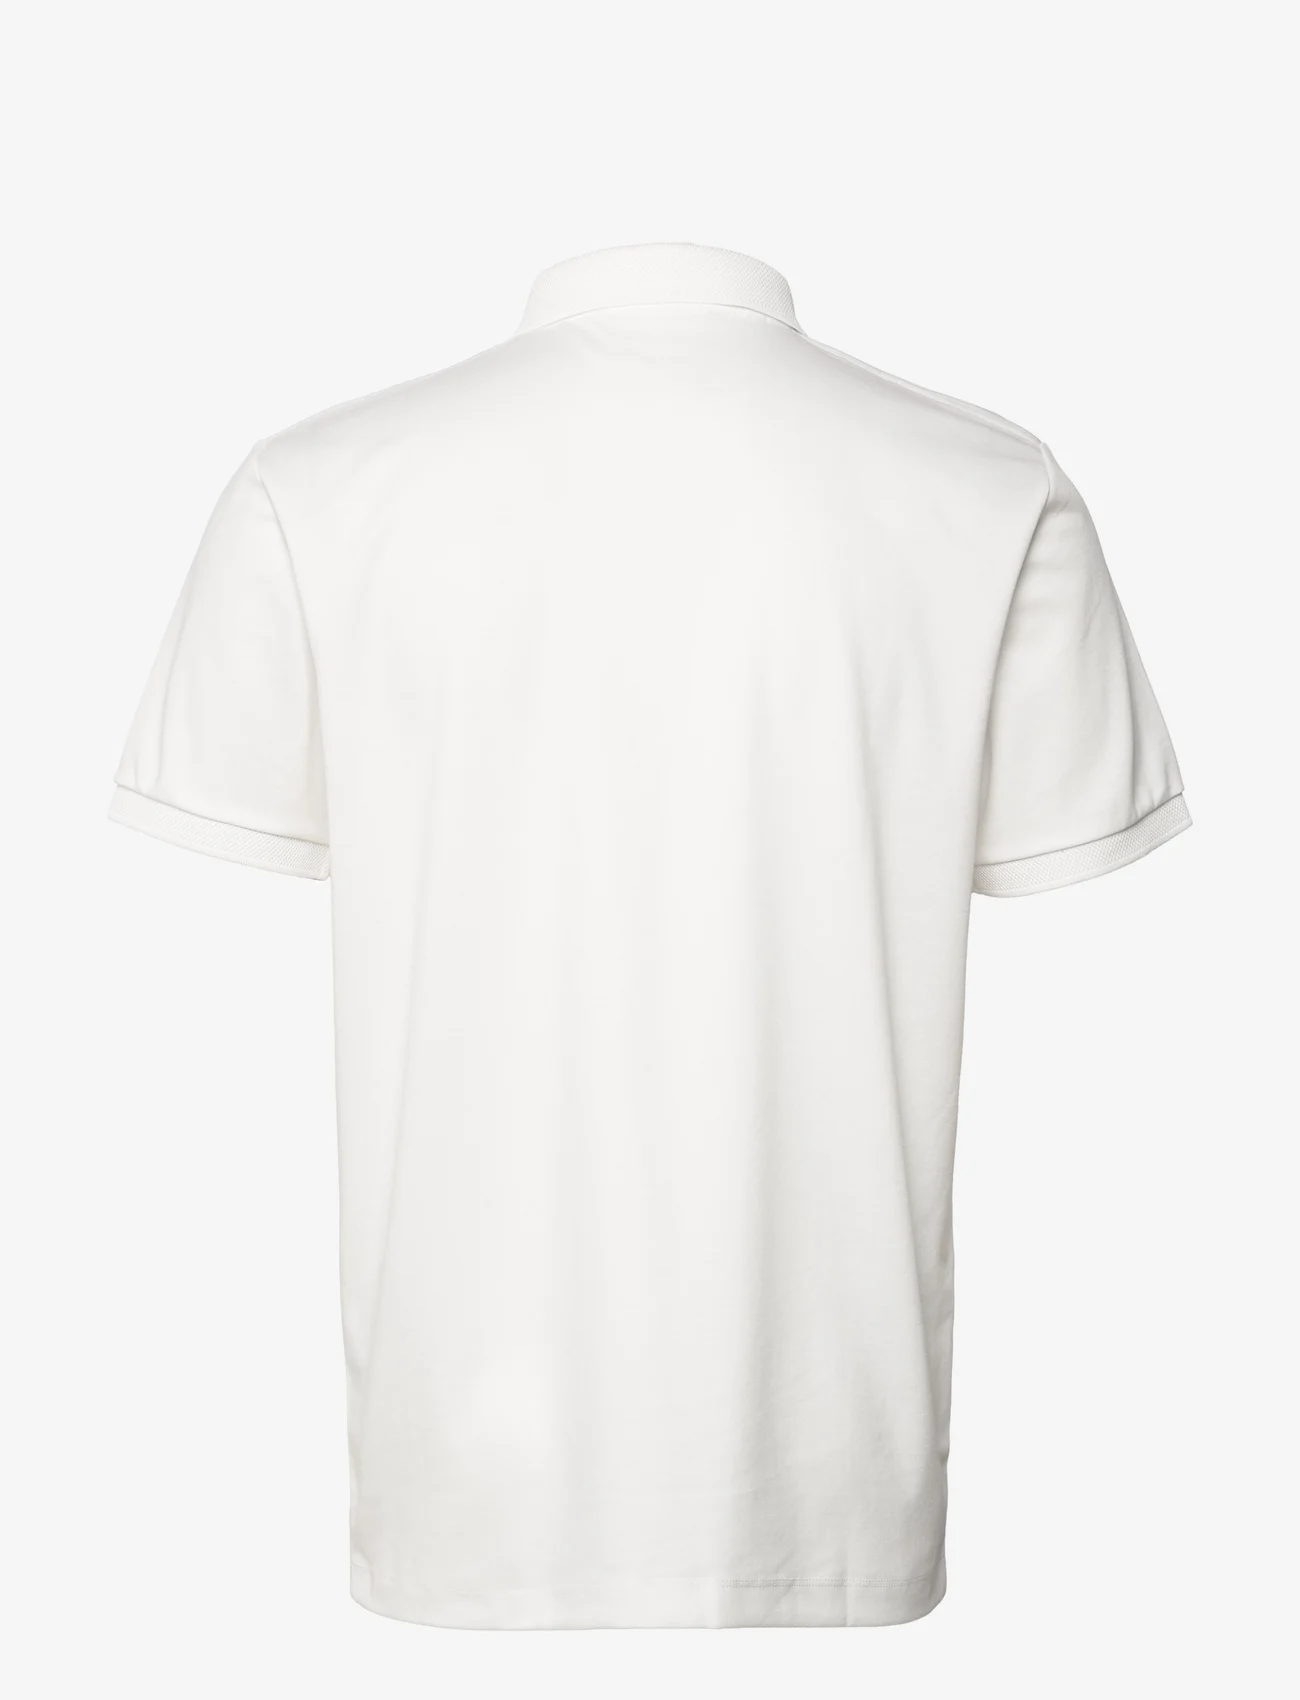 Selected Homme - SLHFAVE ZIP SS POLO NOOS - lowest prices - cloud dancer - 1